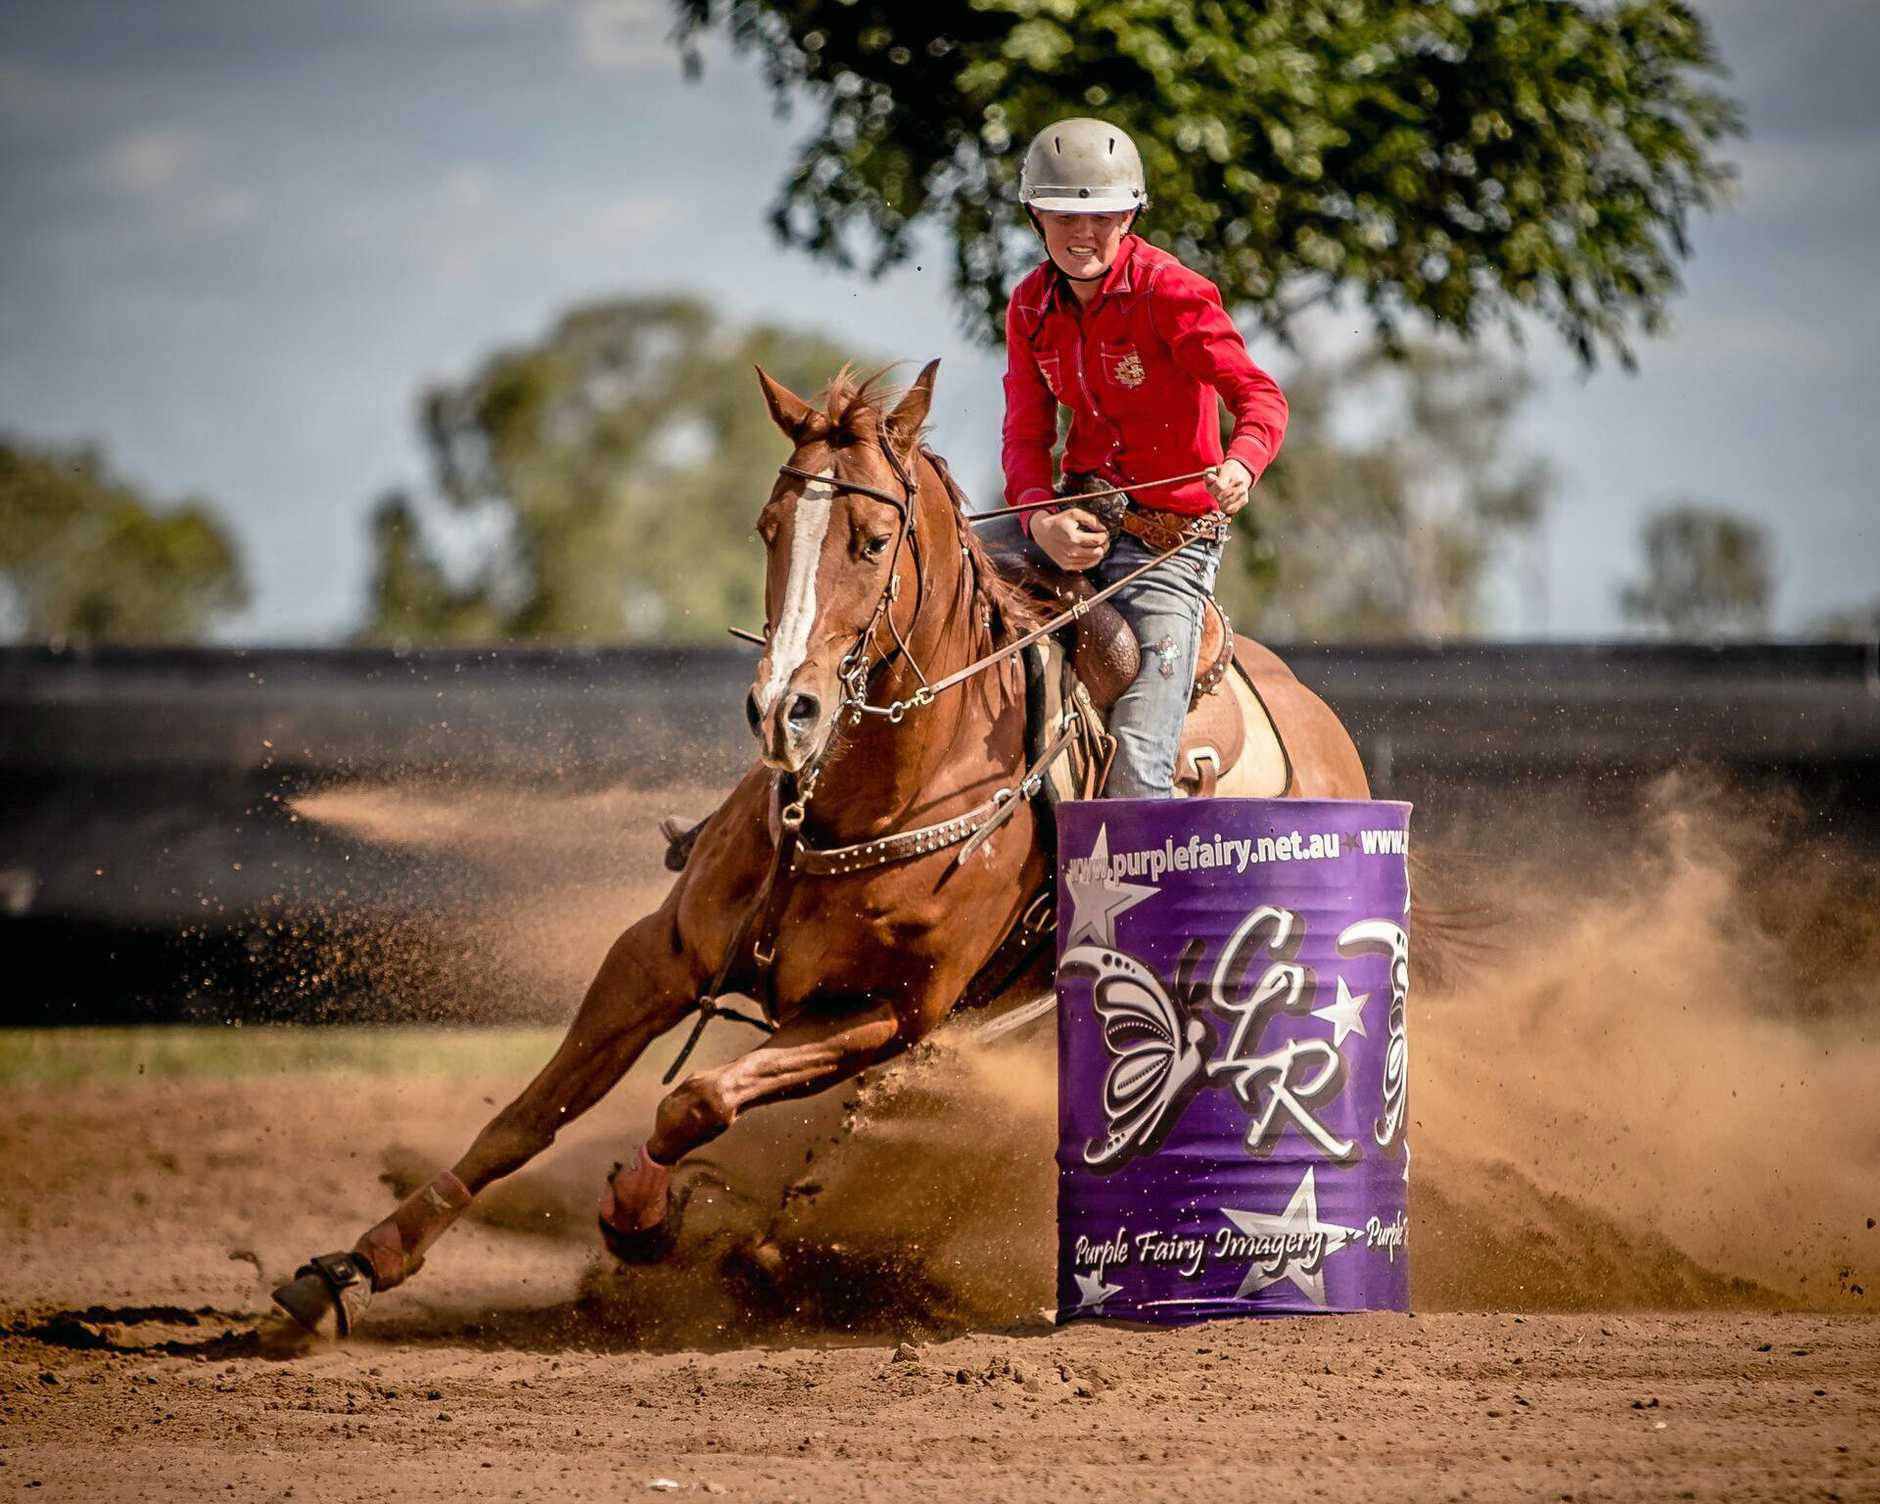 A barrel racer displays great skill and determination during a competition. Wallpaper